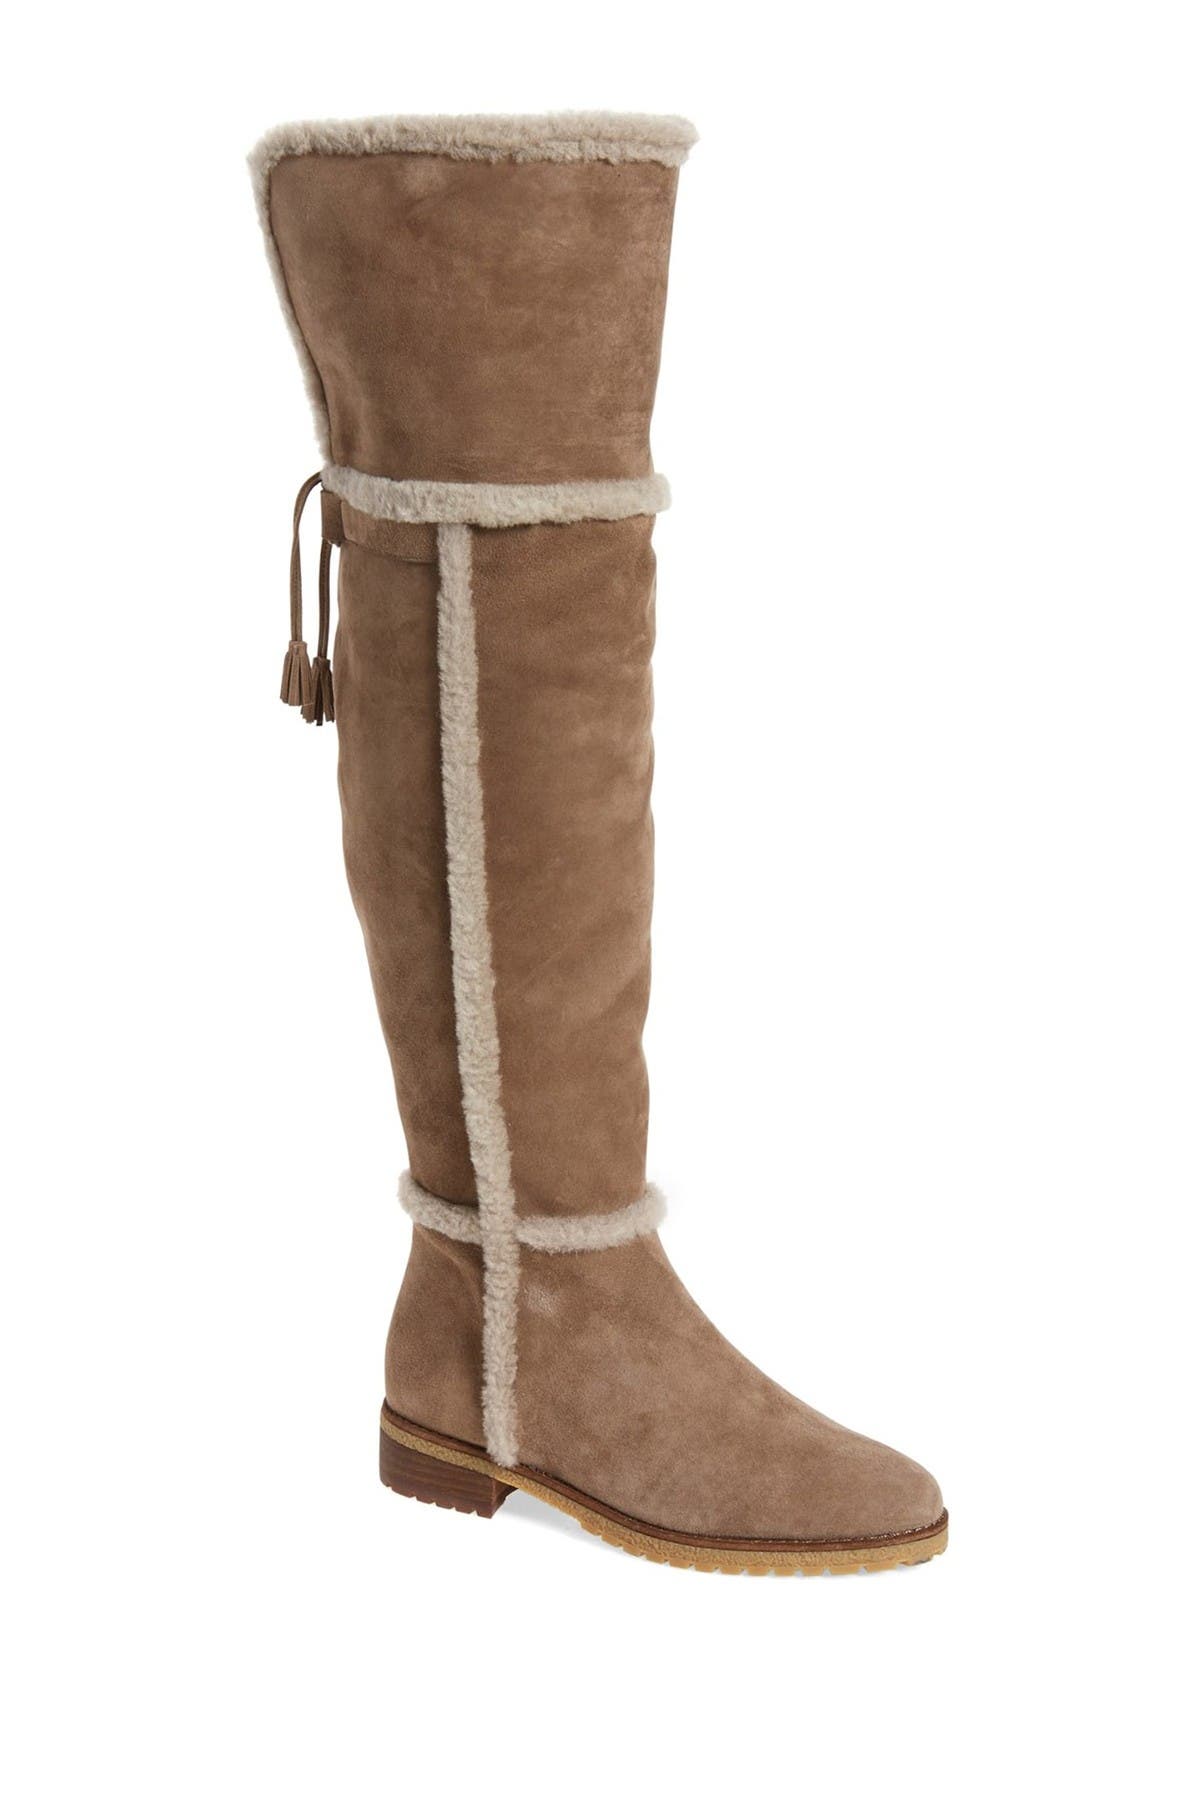 frye over the knee shearling boots